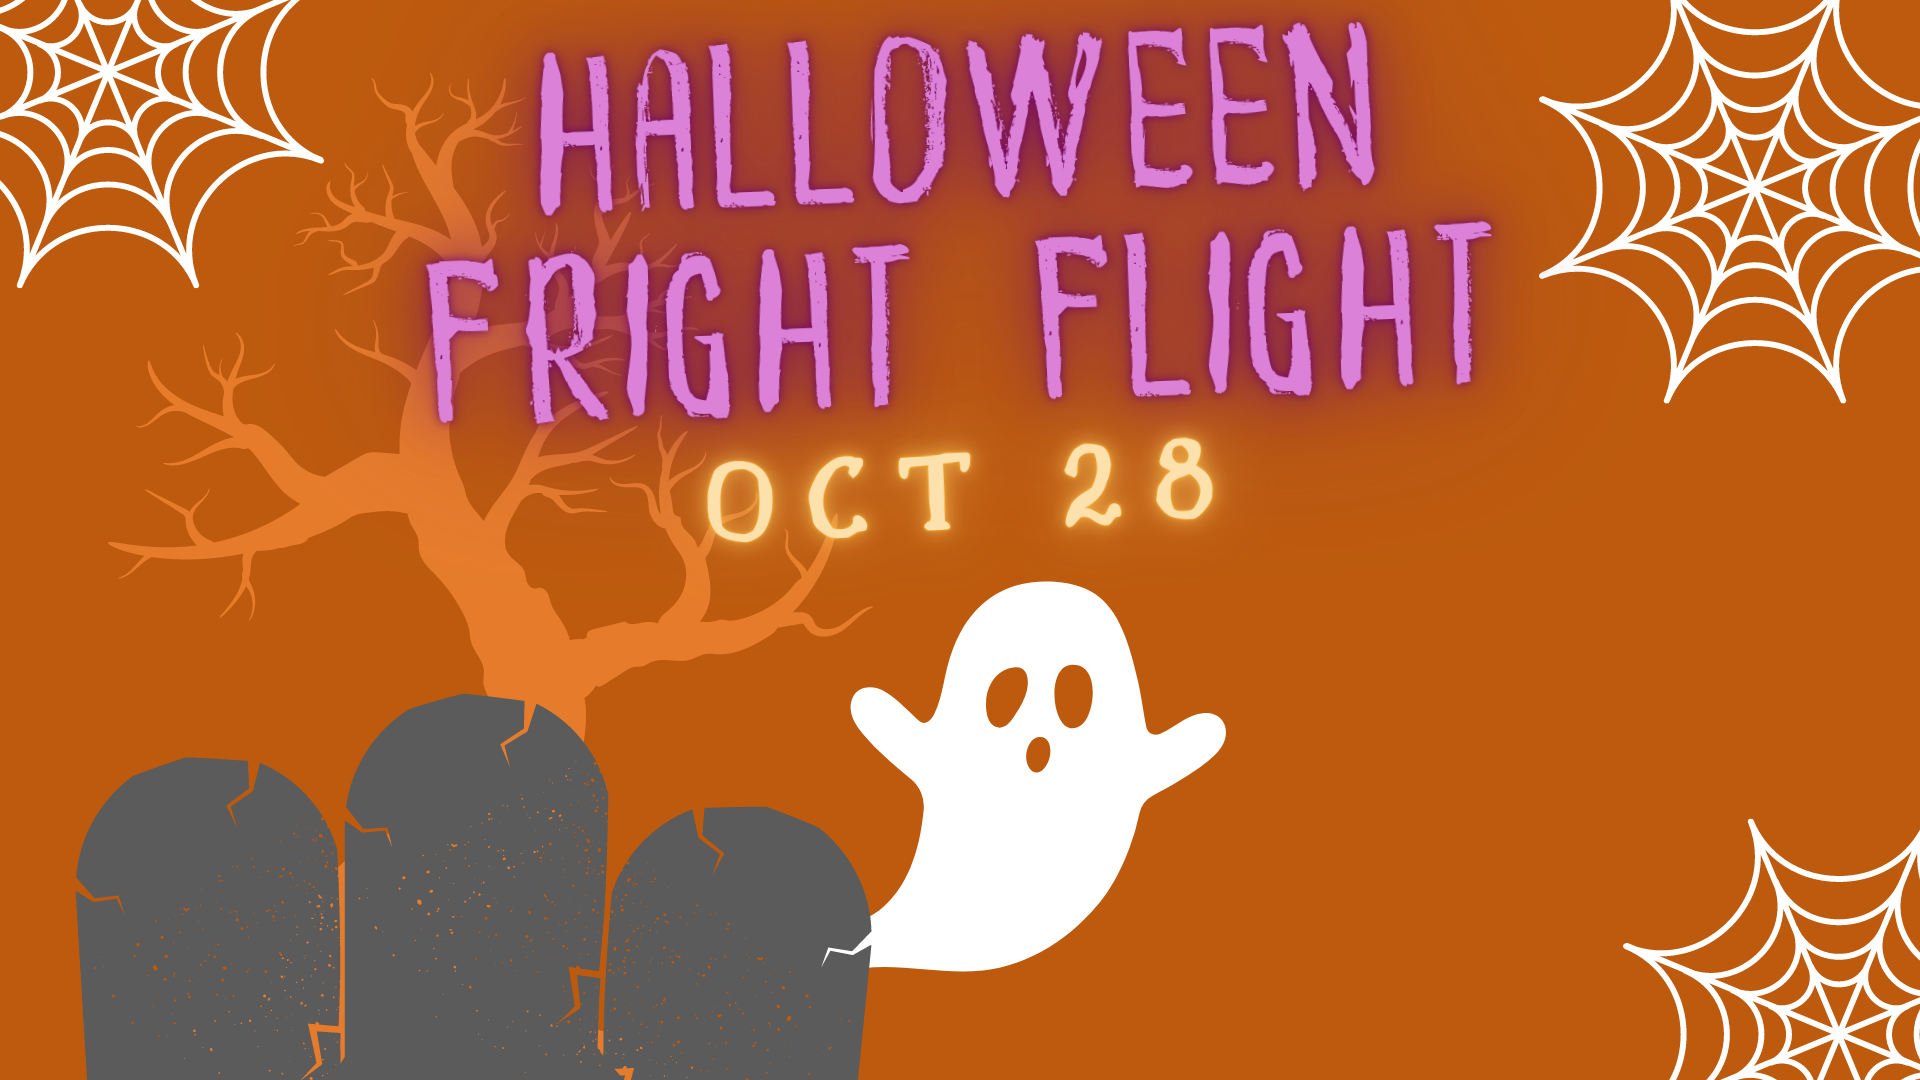 Halloween Fright Flight at Czig Meister Brewing Company on October 28th